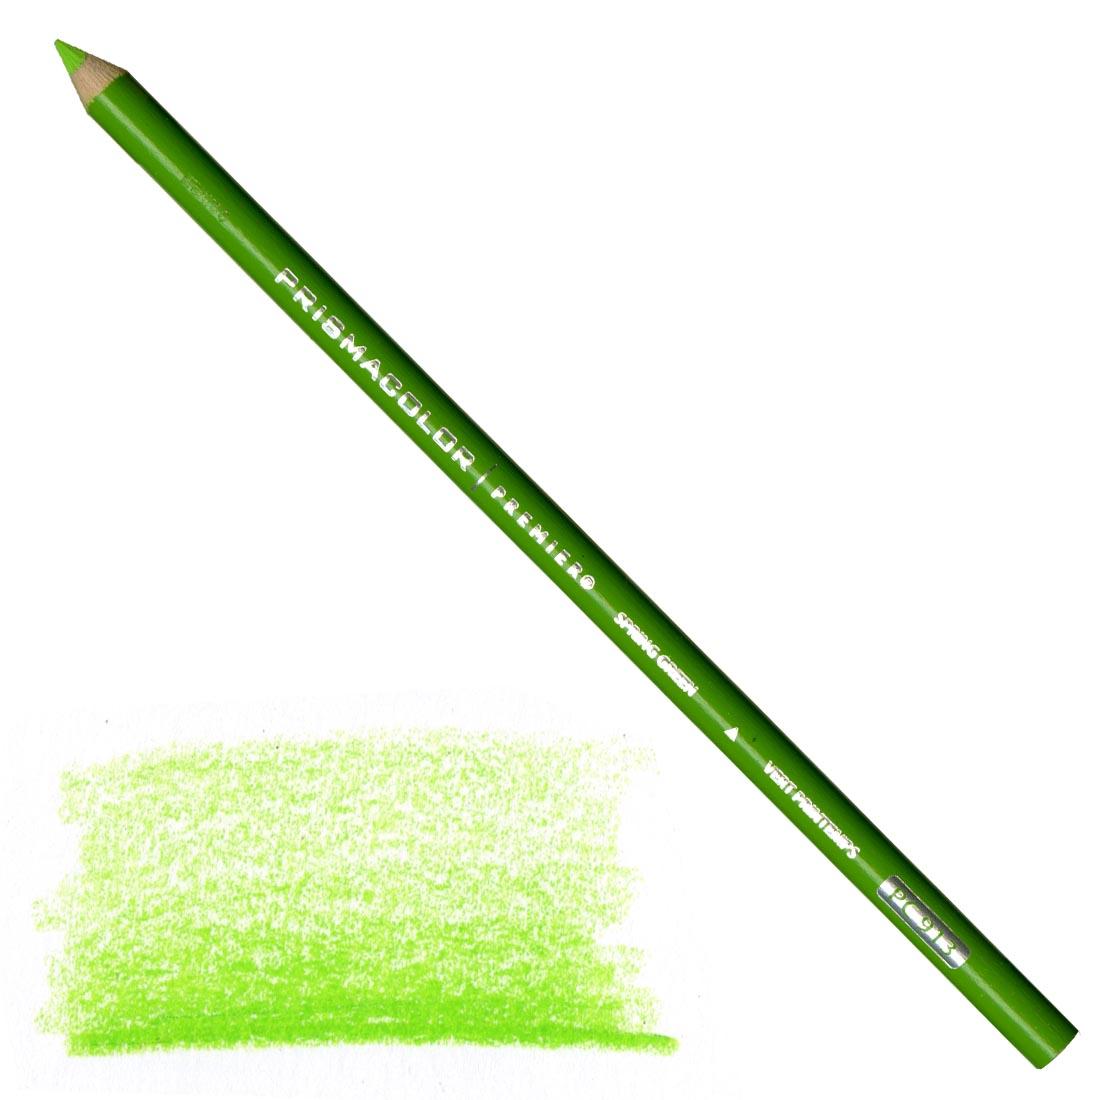 Spring Green Prismacolor Premier Colored Pencil with a sample colored swatch